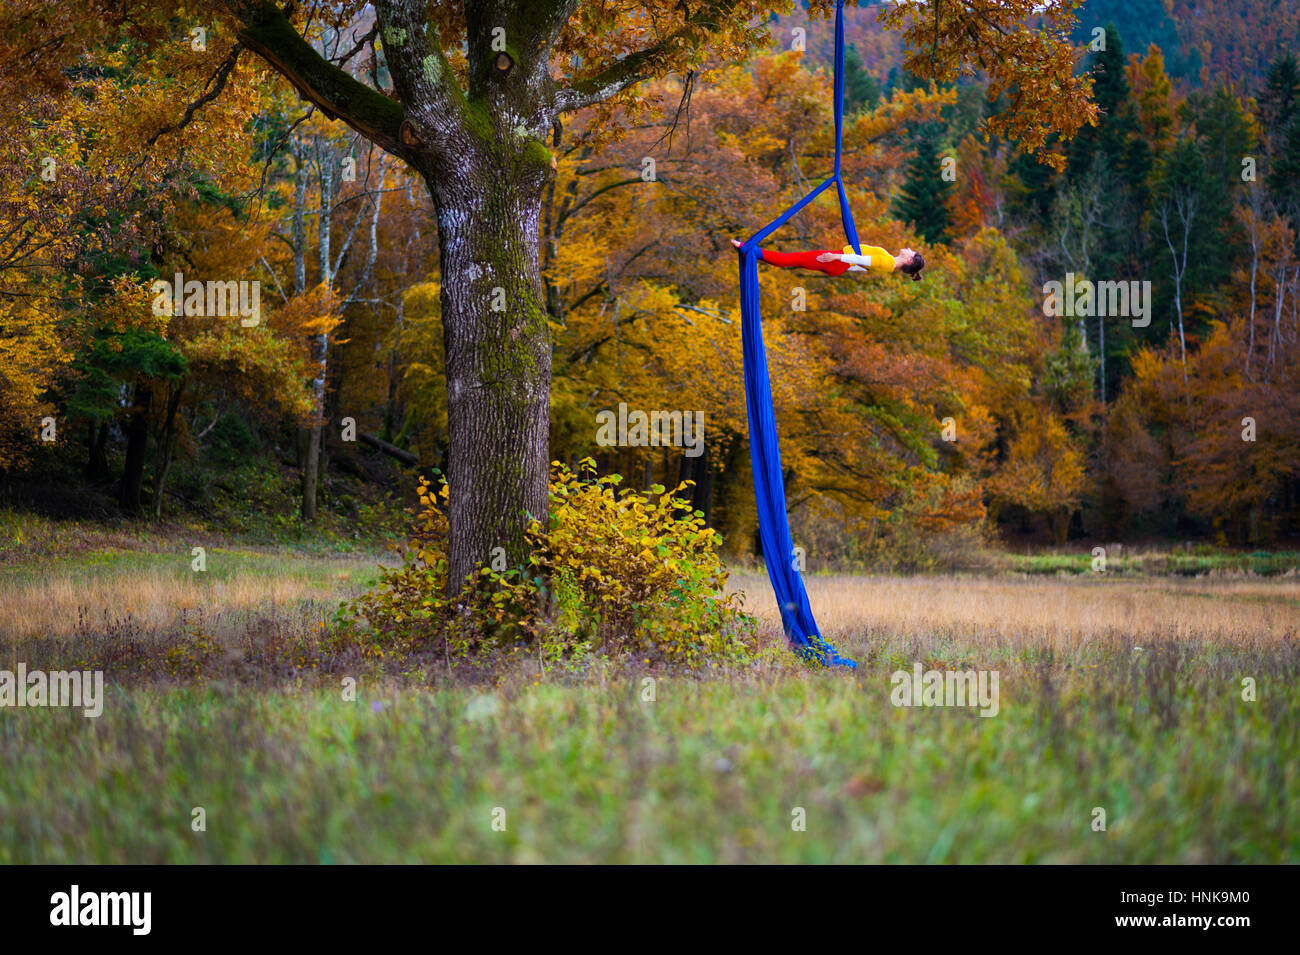 Performing aerial acrobatics on a blue silk hanging from an oak tree. Stock Photo